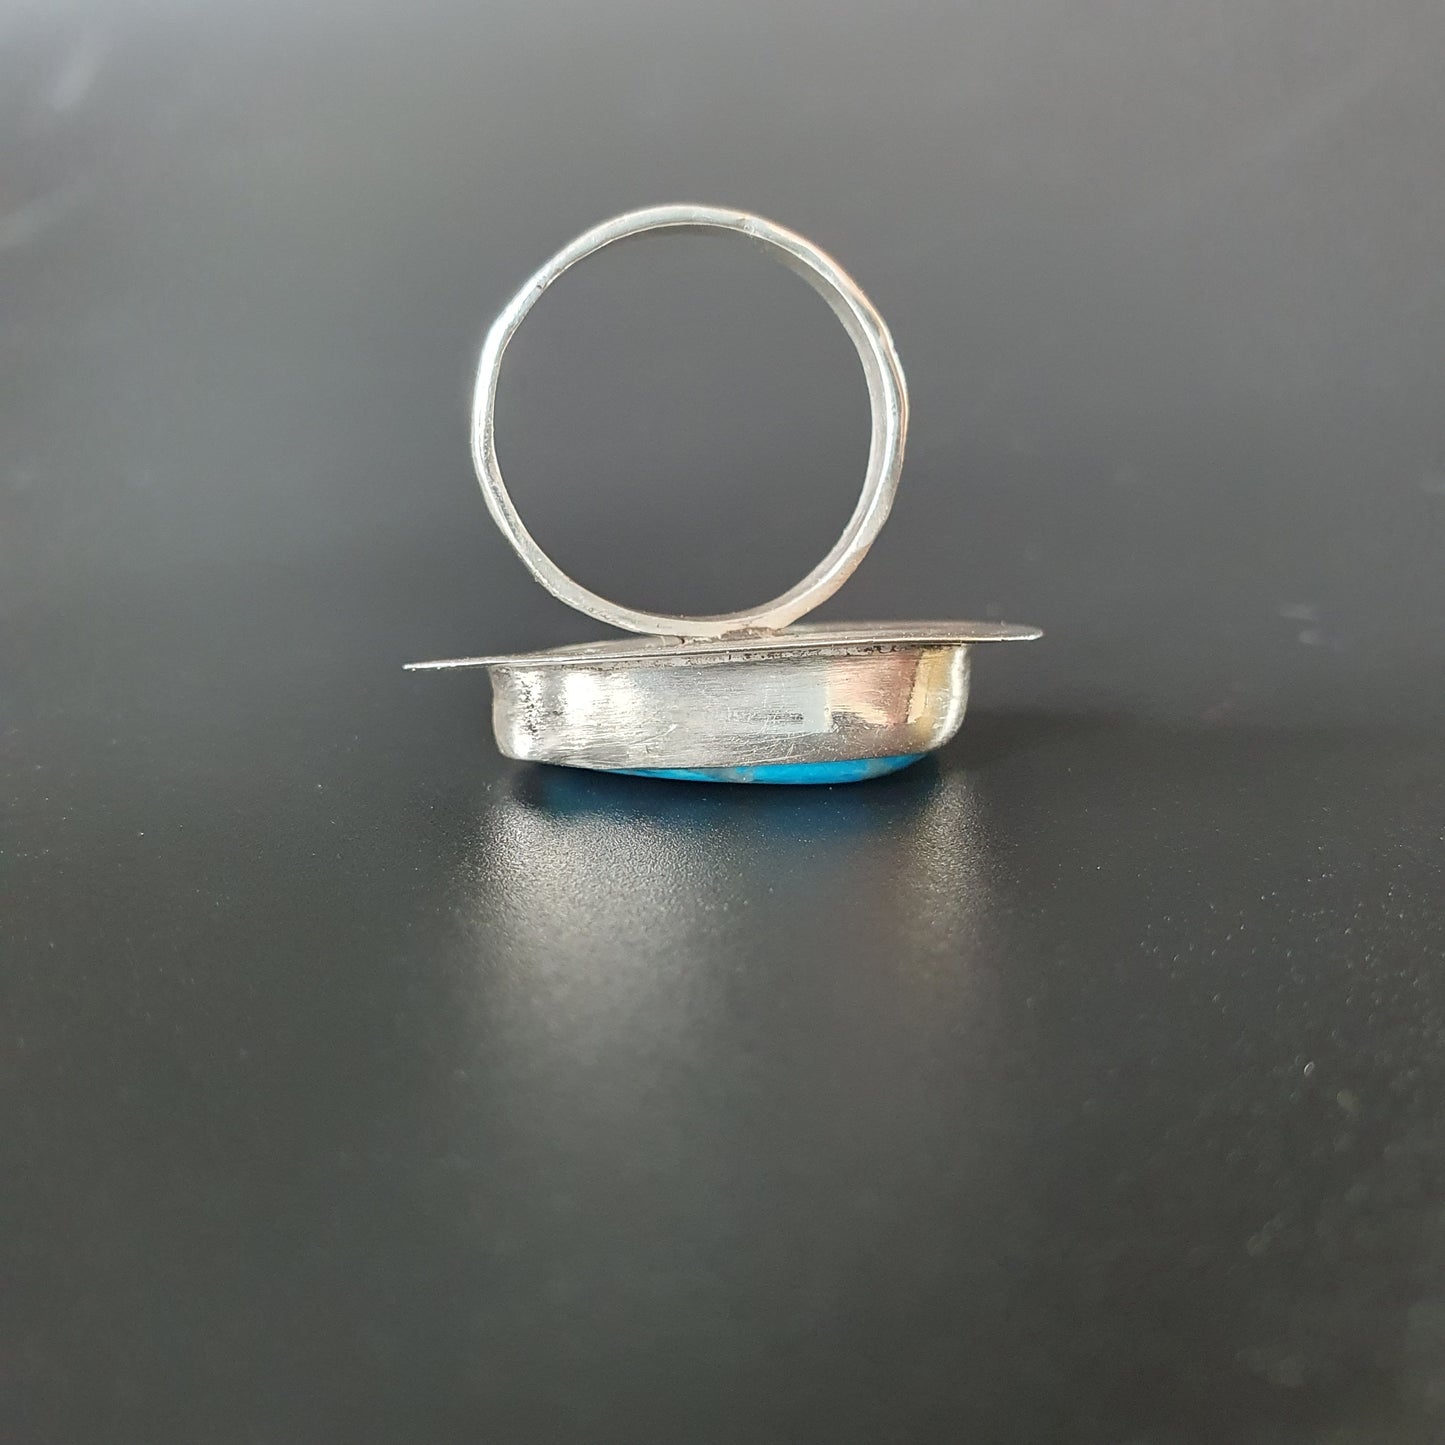 Turquoise ring handmade jewelry boho gifts in sterling silver 925